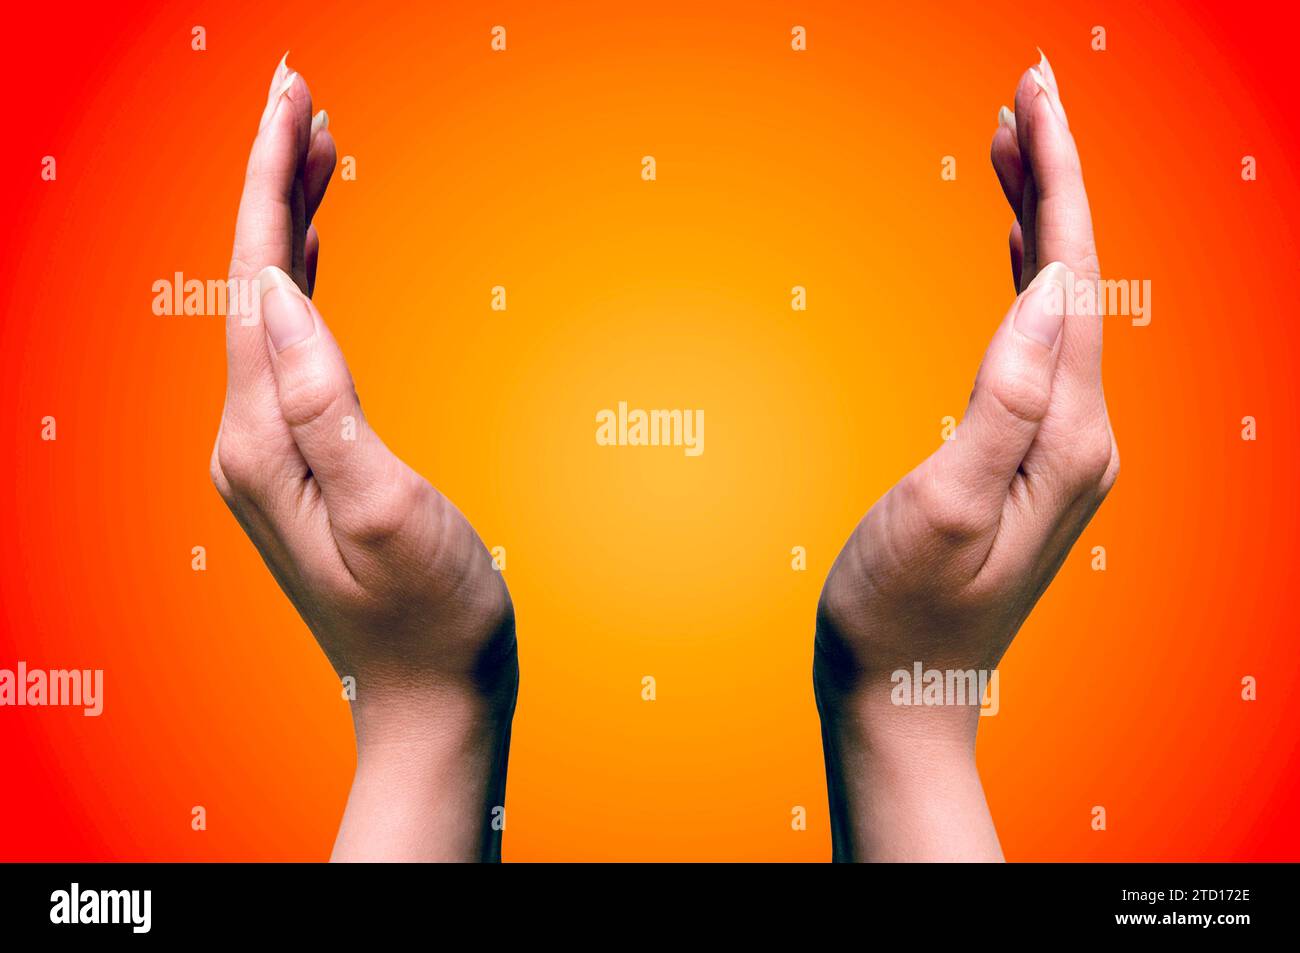 hands in gesture of acceptance or protection Stock Photo